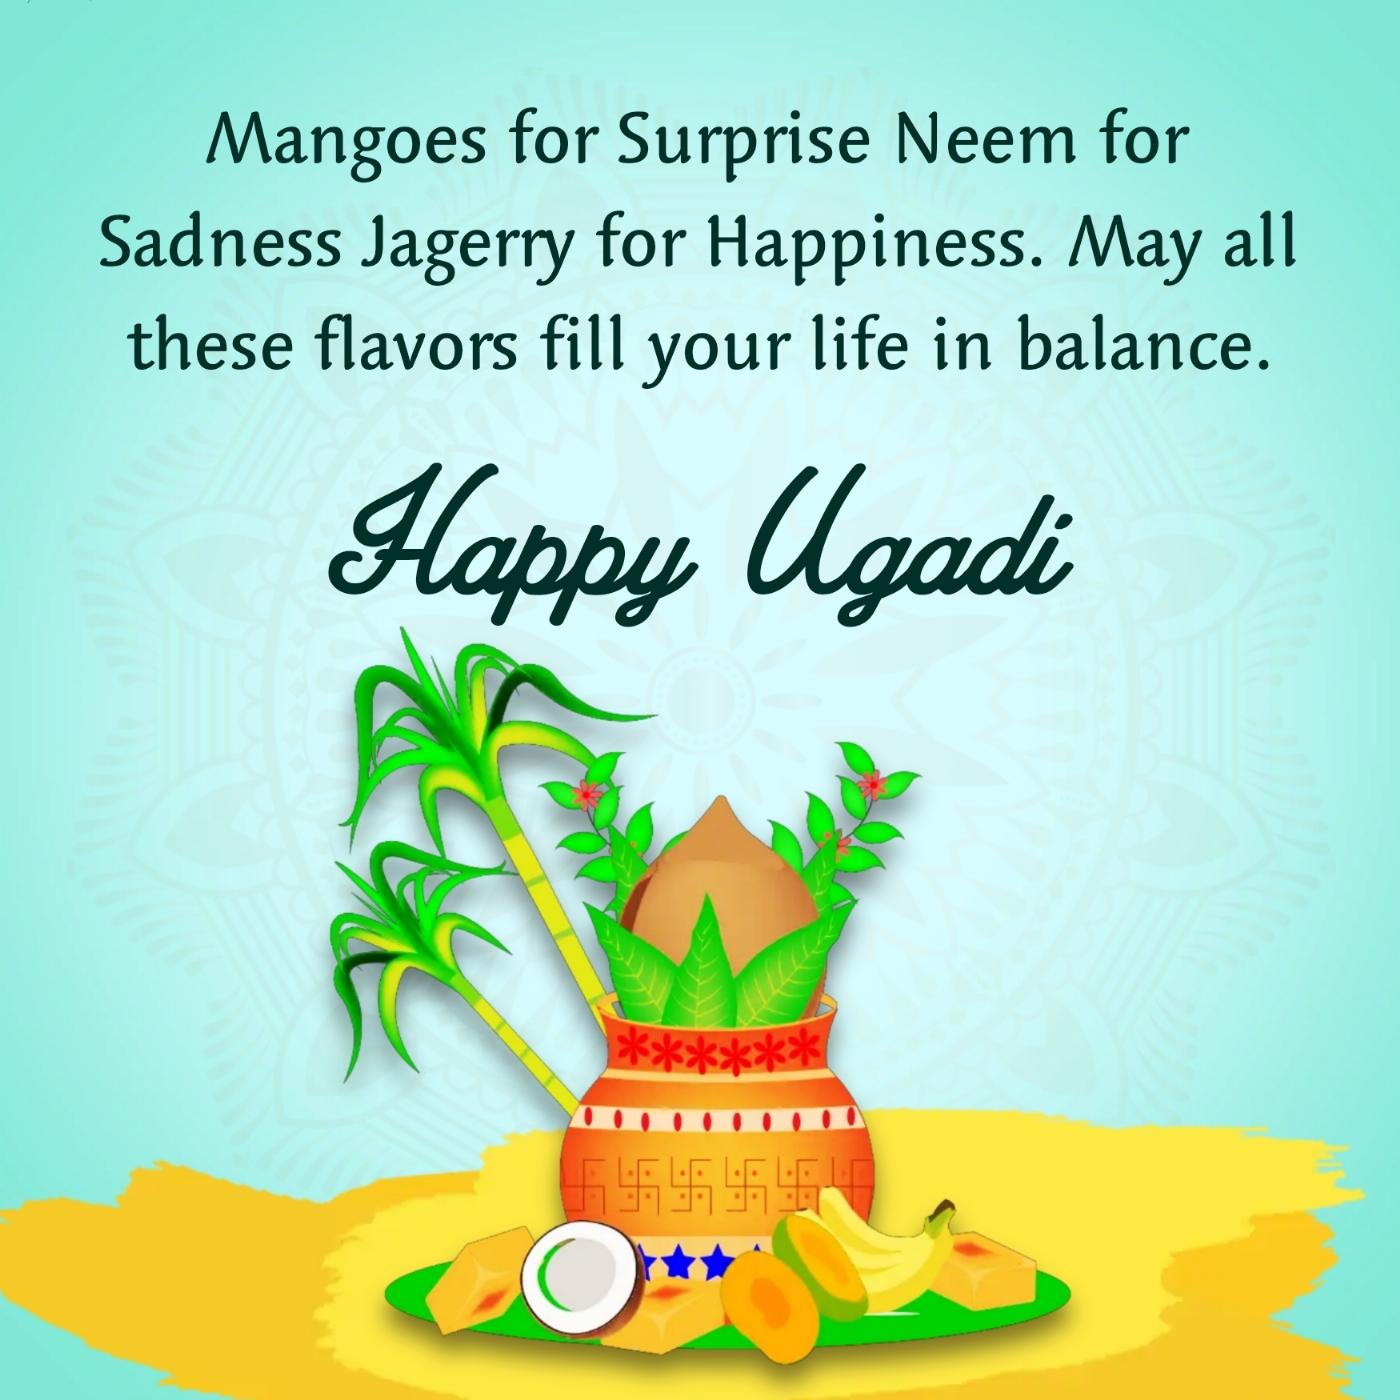 Mangoes for Surprise Neem for Sadness Jagerry for Happiness